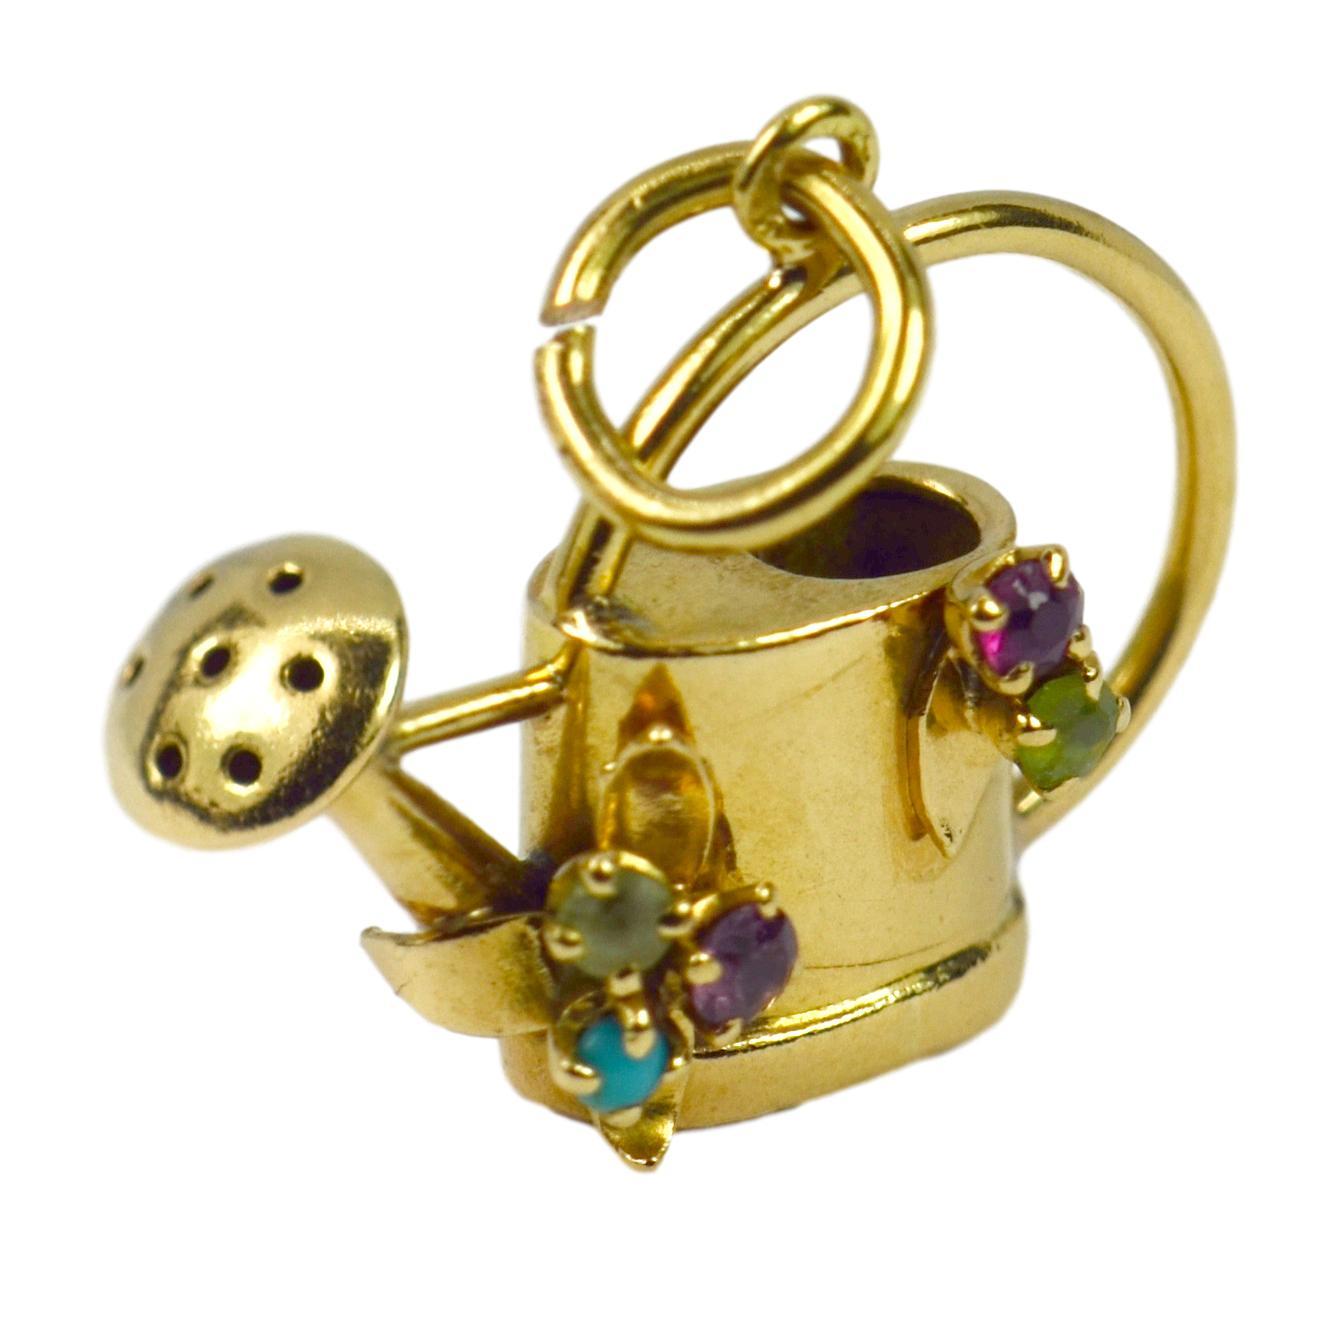 A French 18 karat (18K) yellow gold charm pendant designed as a watering can with paste gems. Stamped with the eagle’s head punch mark for 18 karat gold and French manufacture.

Dimensions: 2.2 x 2.4 x 0.5 cm
Weight: 3.34 grams
